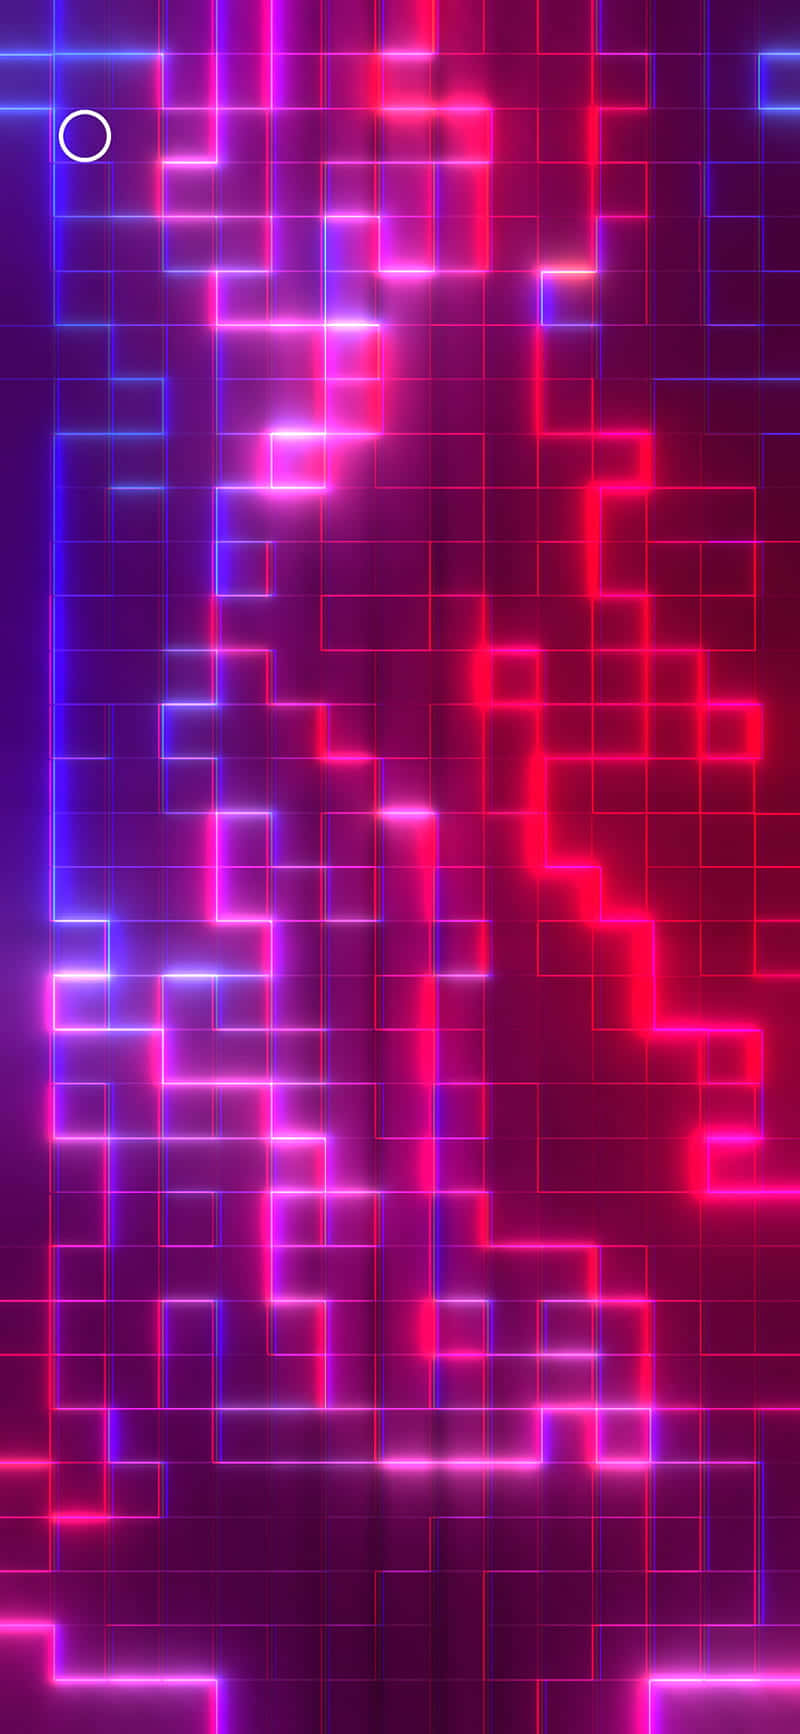 Glowing Grid In Red And Purple Background